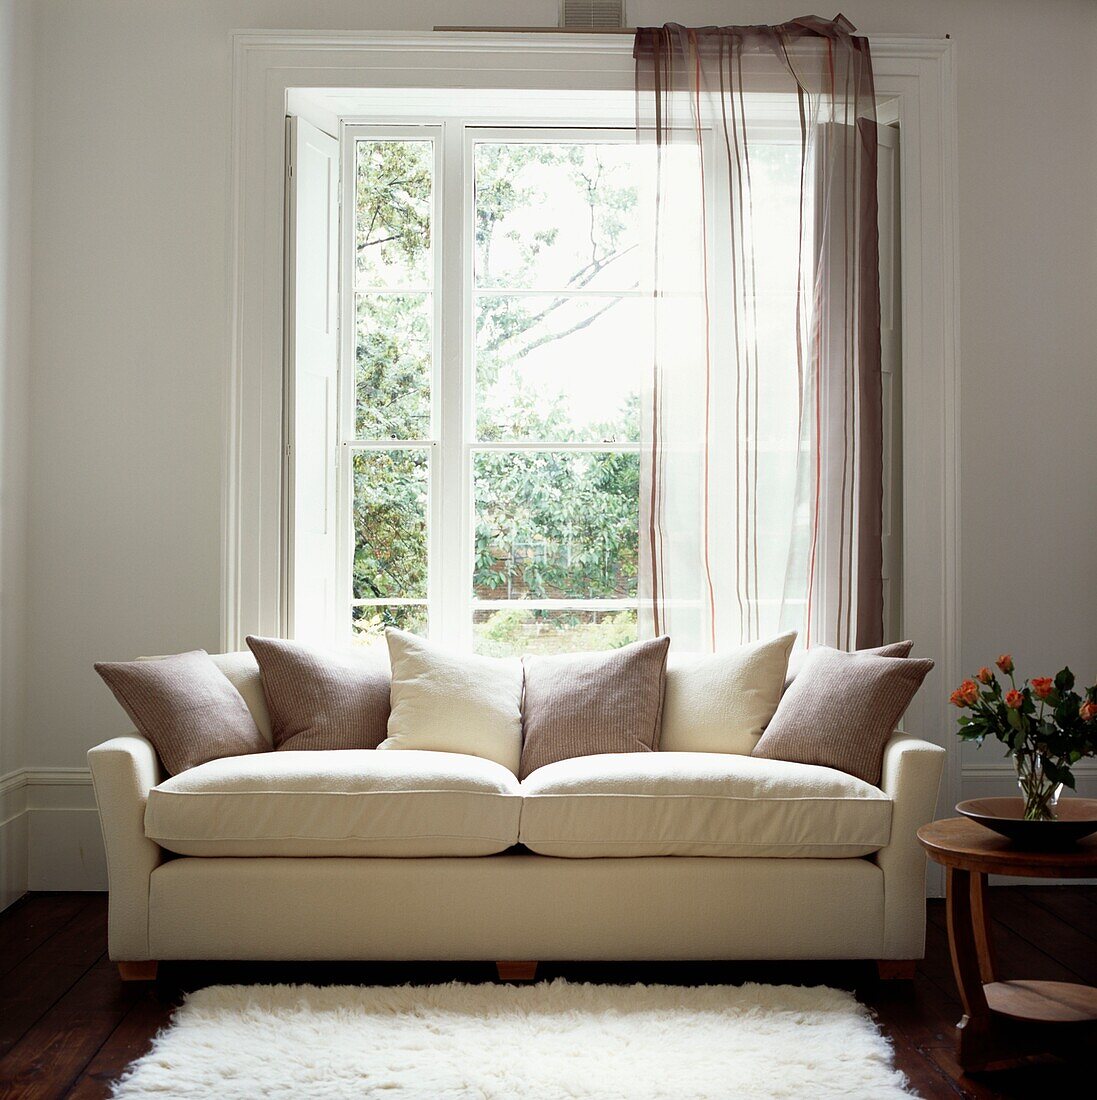 Cream and light brown cushions on sofa at window with co-ordinated curtain 